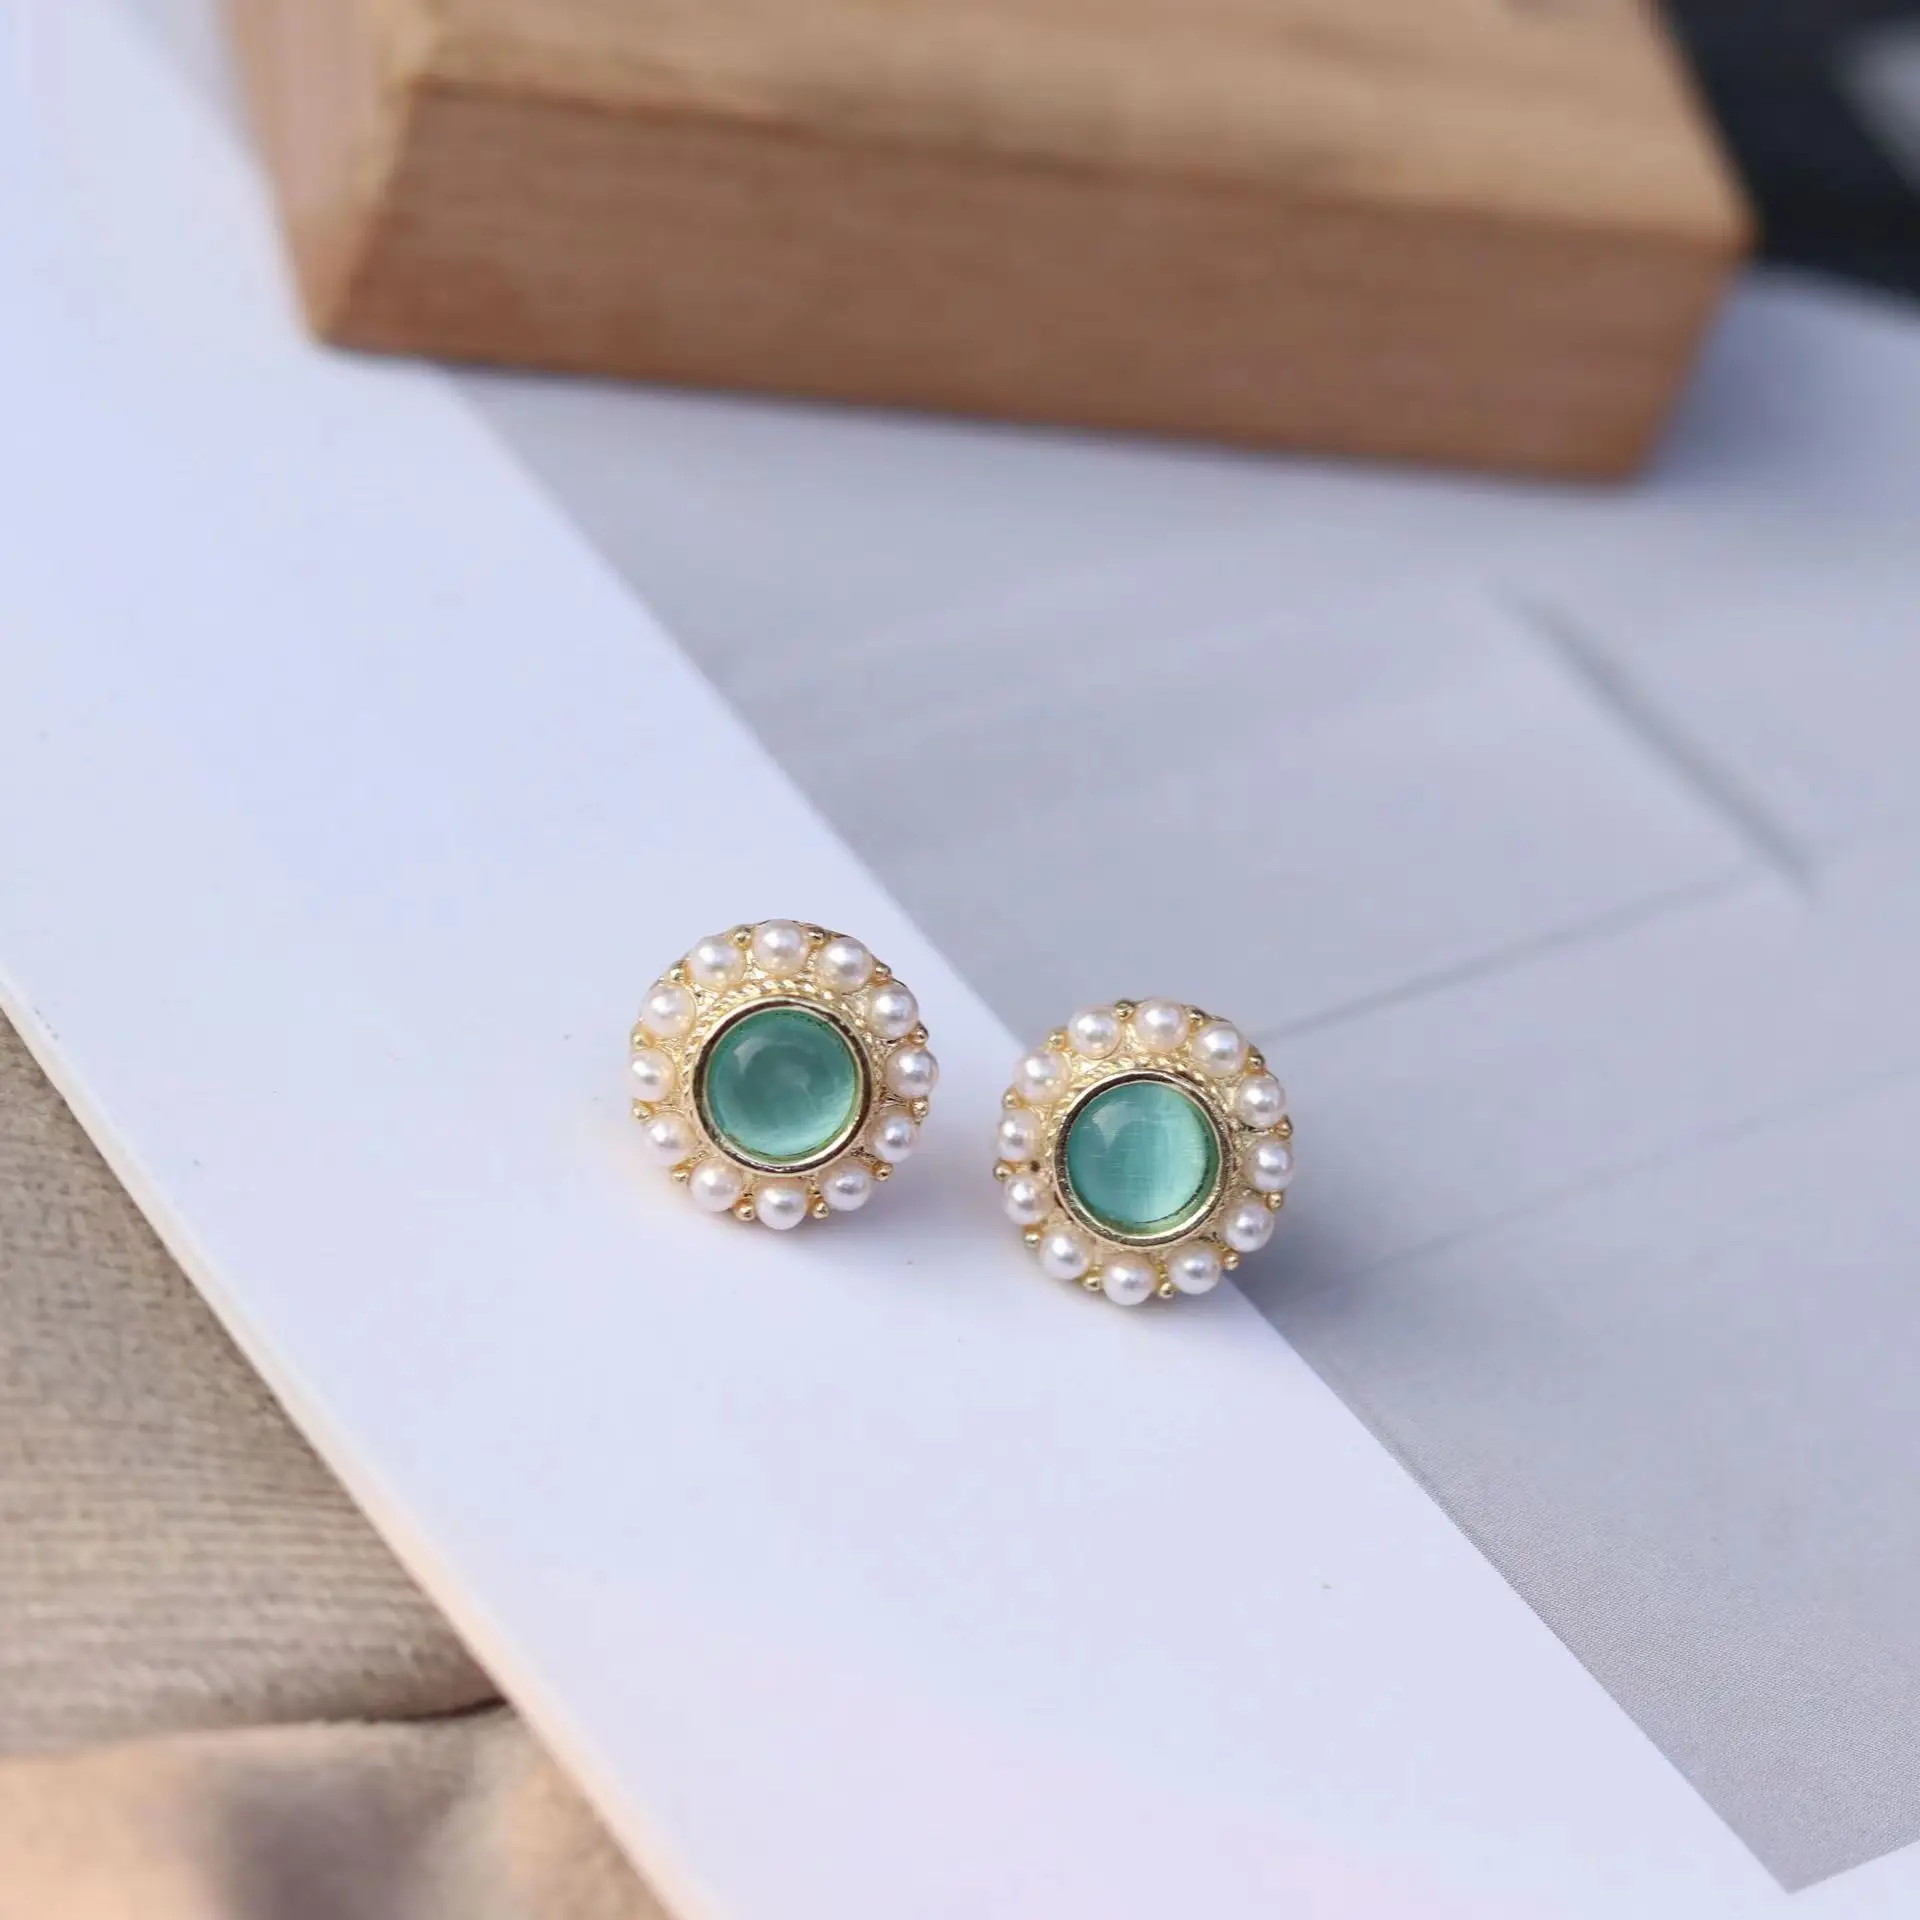 

Classic Peals Stud Earrings Women Fashion Jewelry Aretes De Mujer Moda Brincos Small Para As Mulheres Oorbellen Boucle D'Oreille